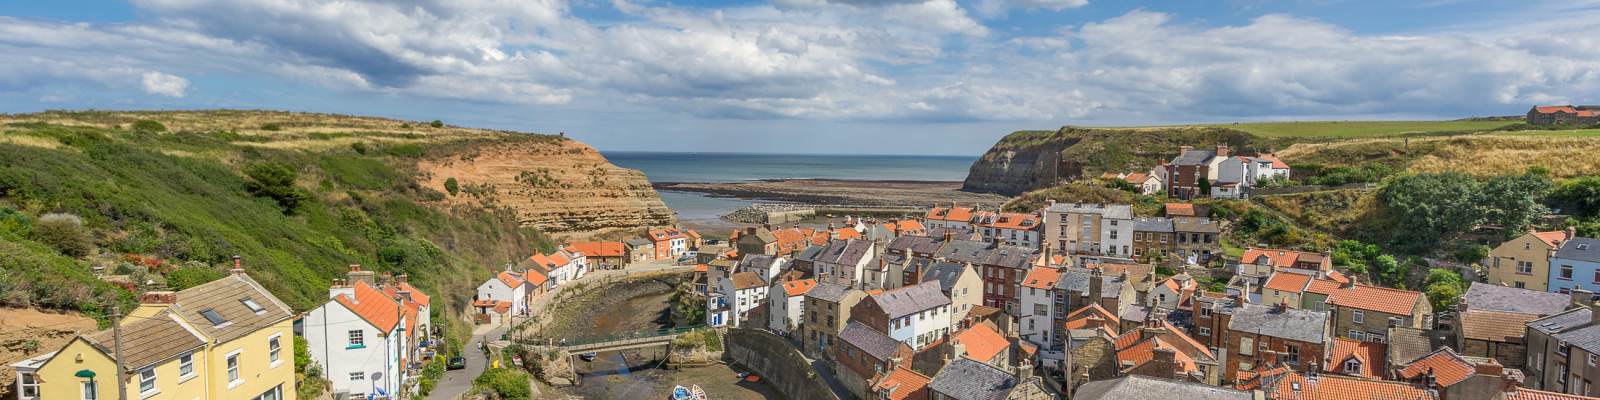 Holiday Cottages In Staithes To Rent Self Catering Staithes